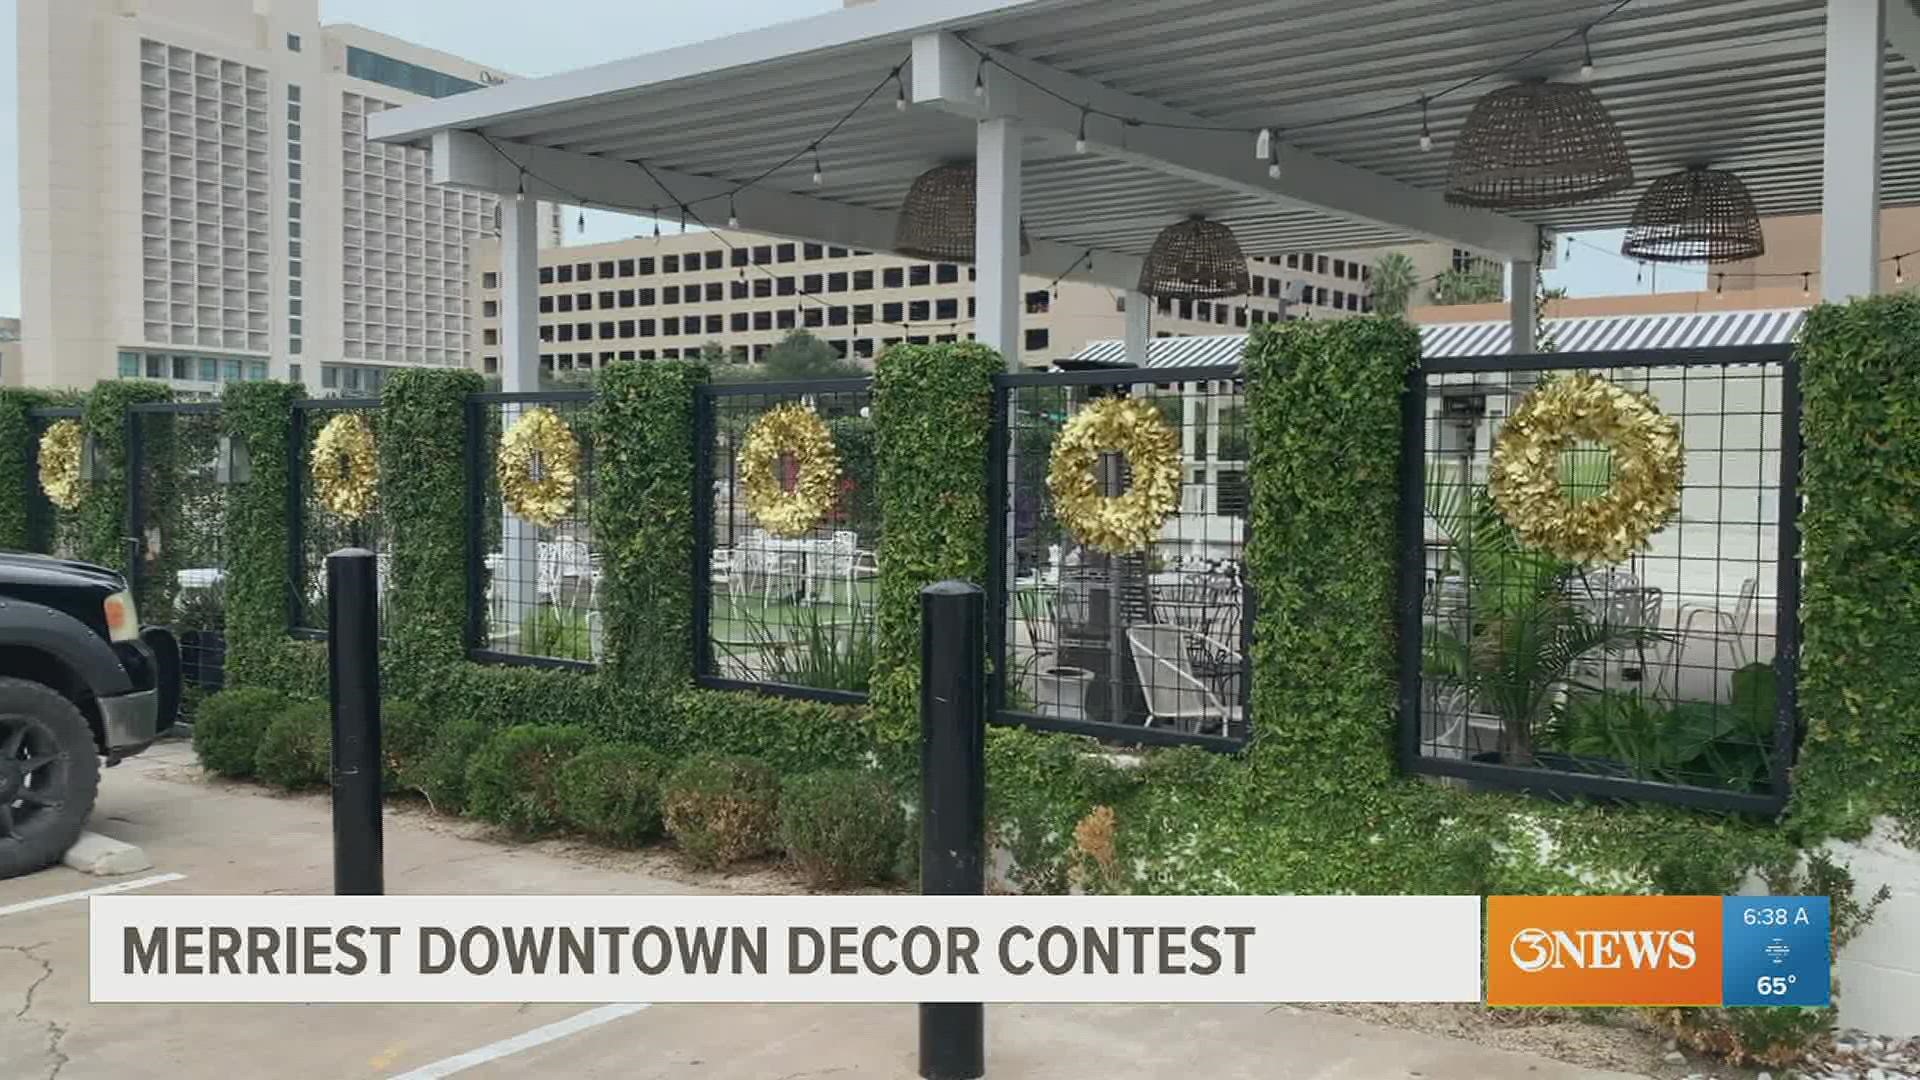 Several businesses have signed up for the competition which brings the joy of the holidays to downtown Corpus Christi.